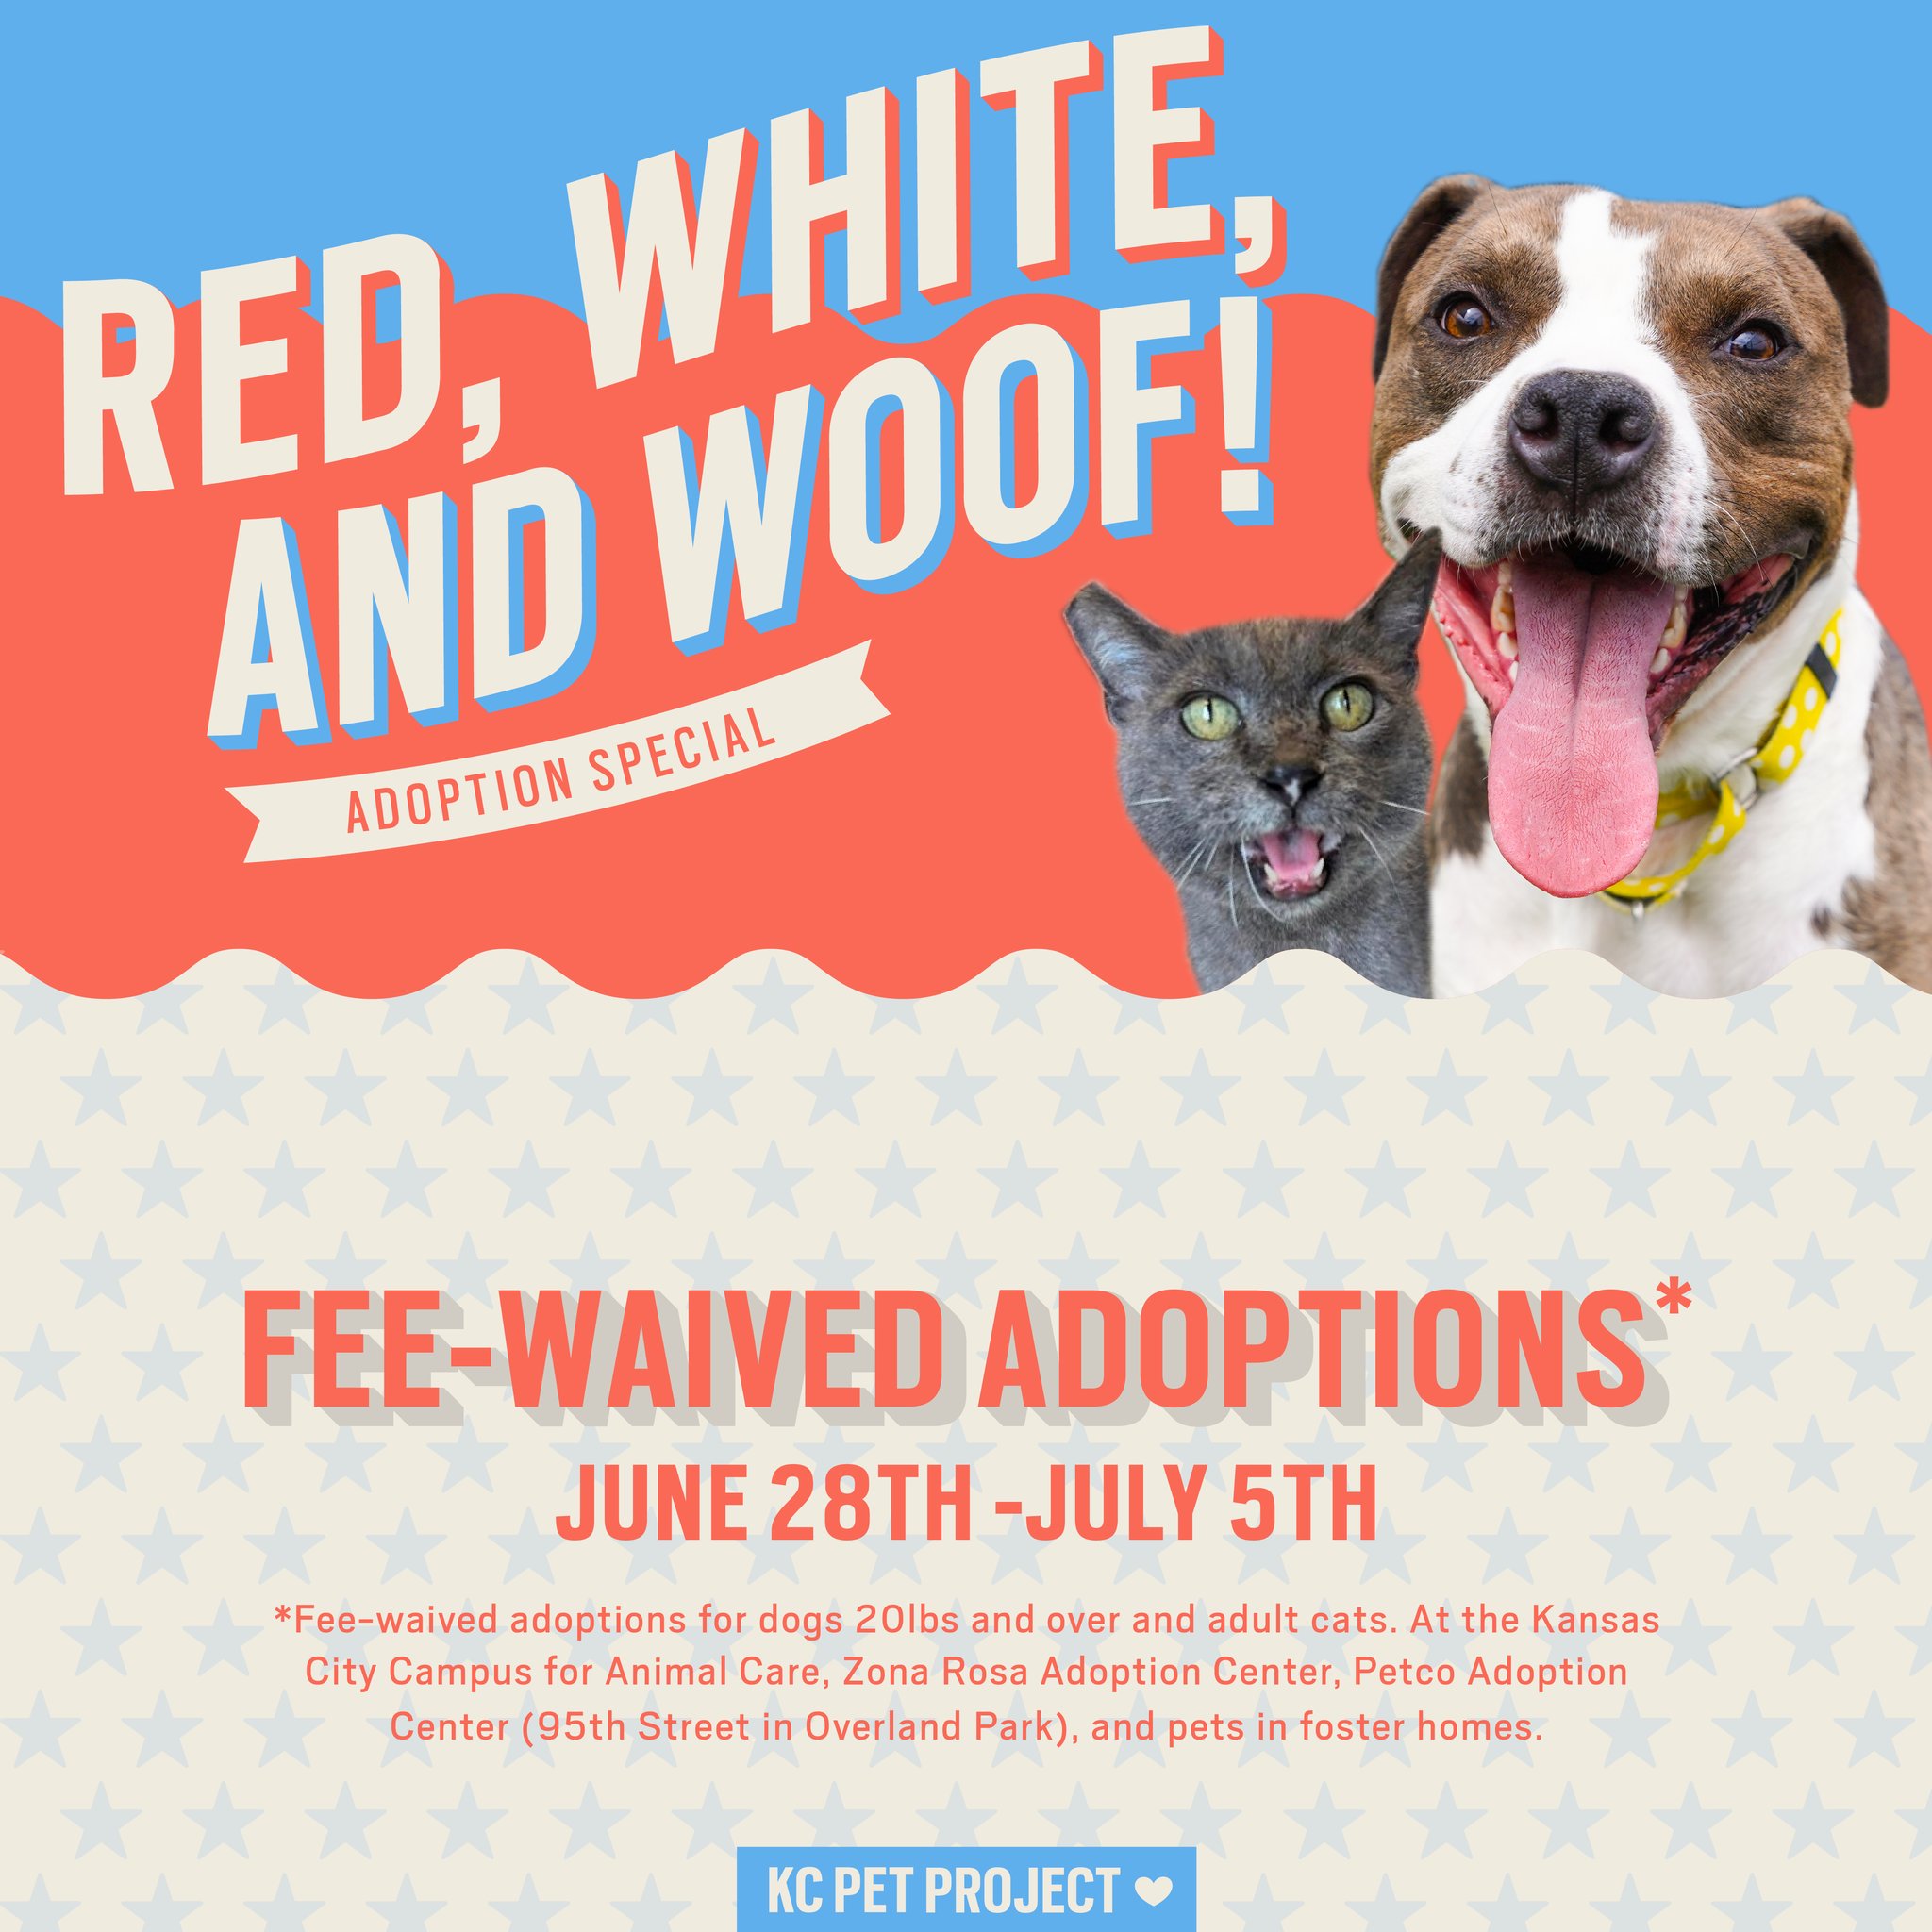 Pet adoption event coming to Empire Ford